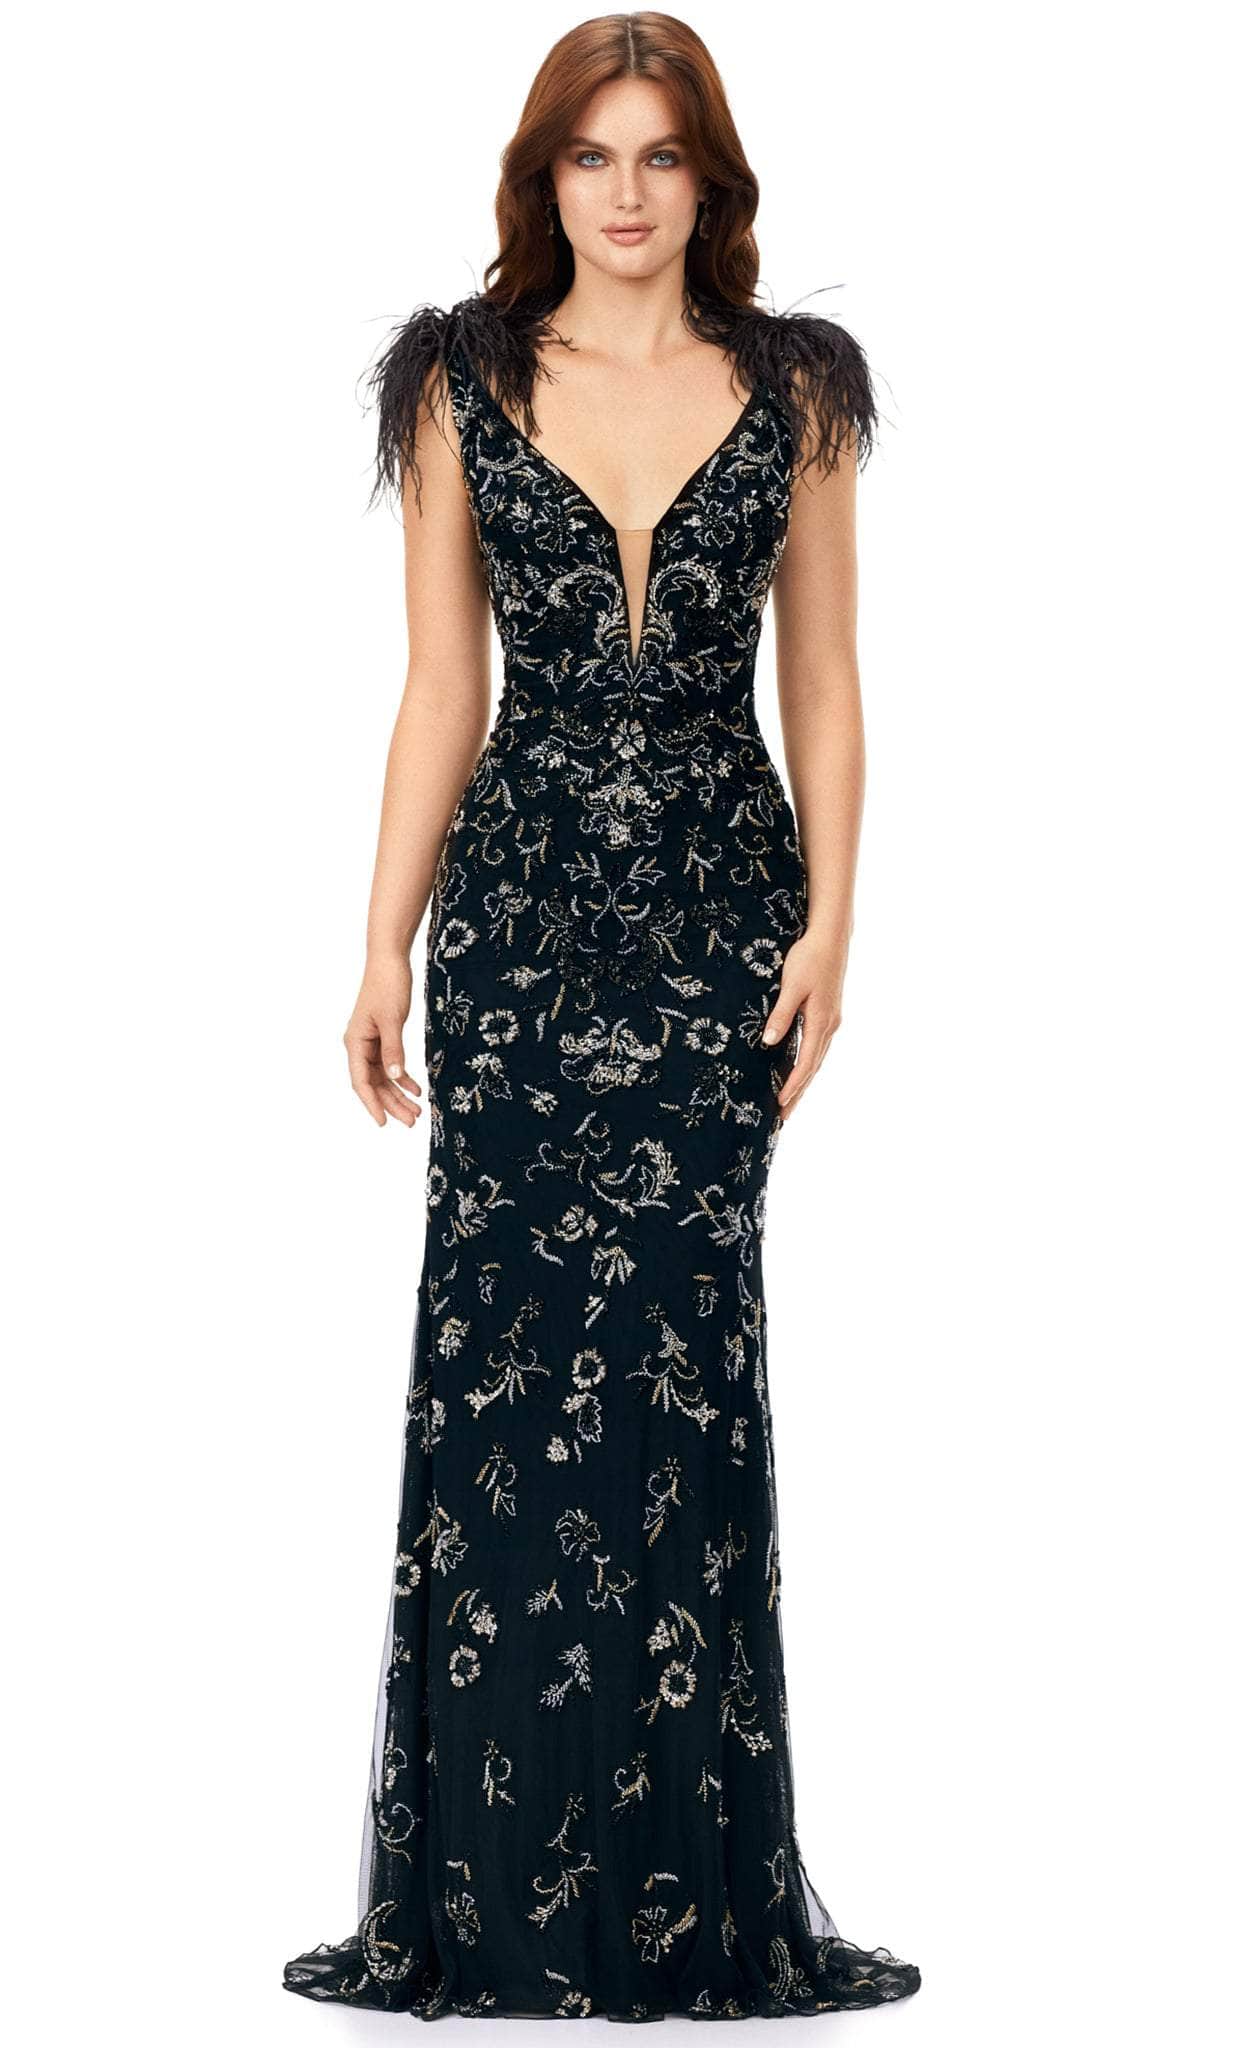 Image of Ashley Lauren 11349 - Sleeveless Feathered Evening Gown